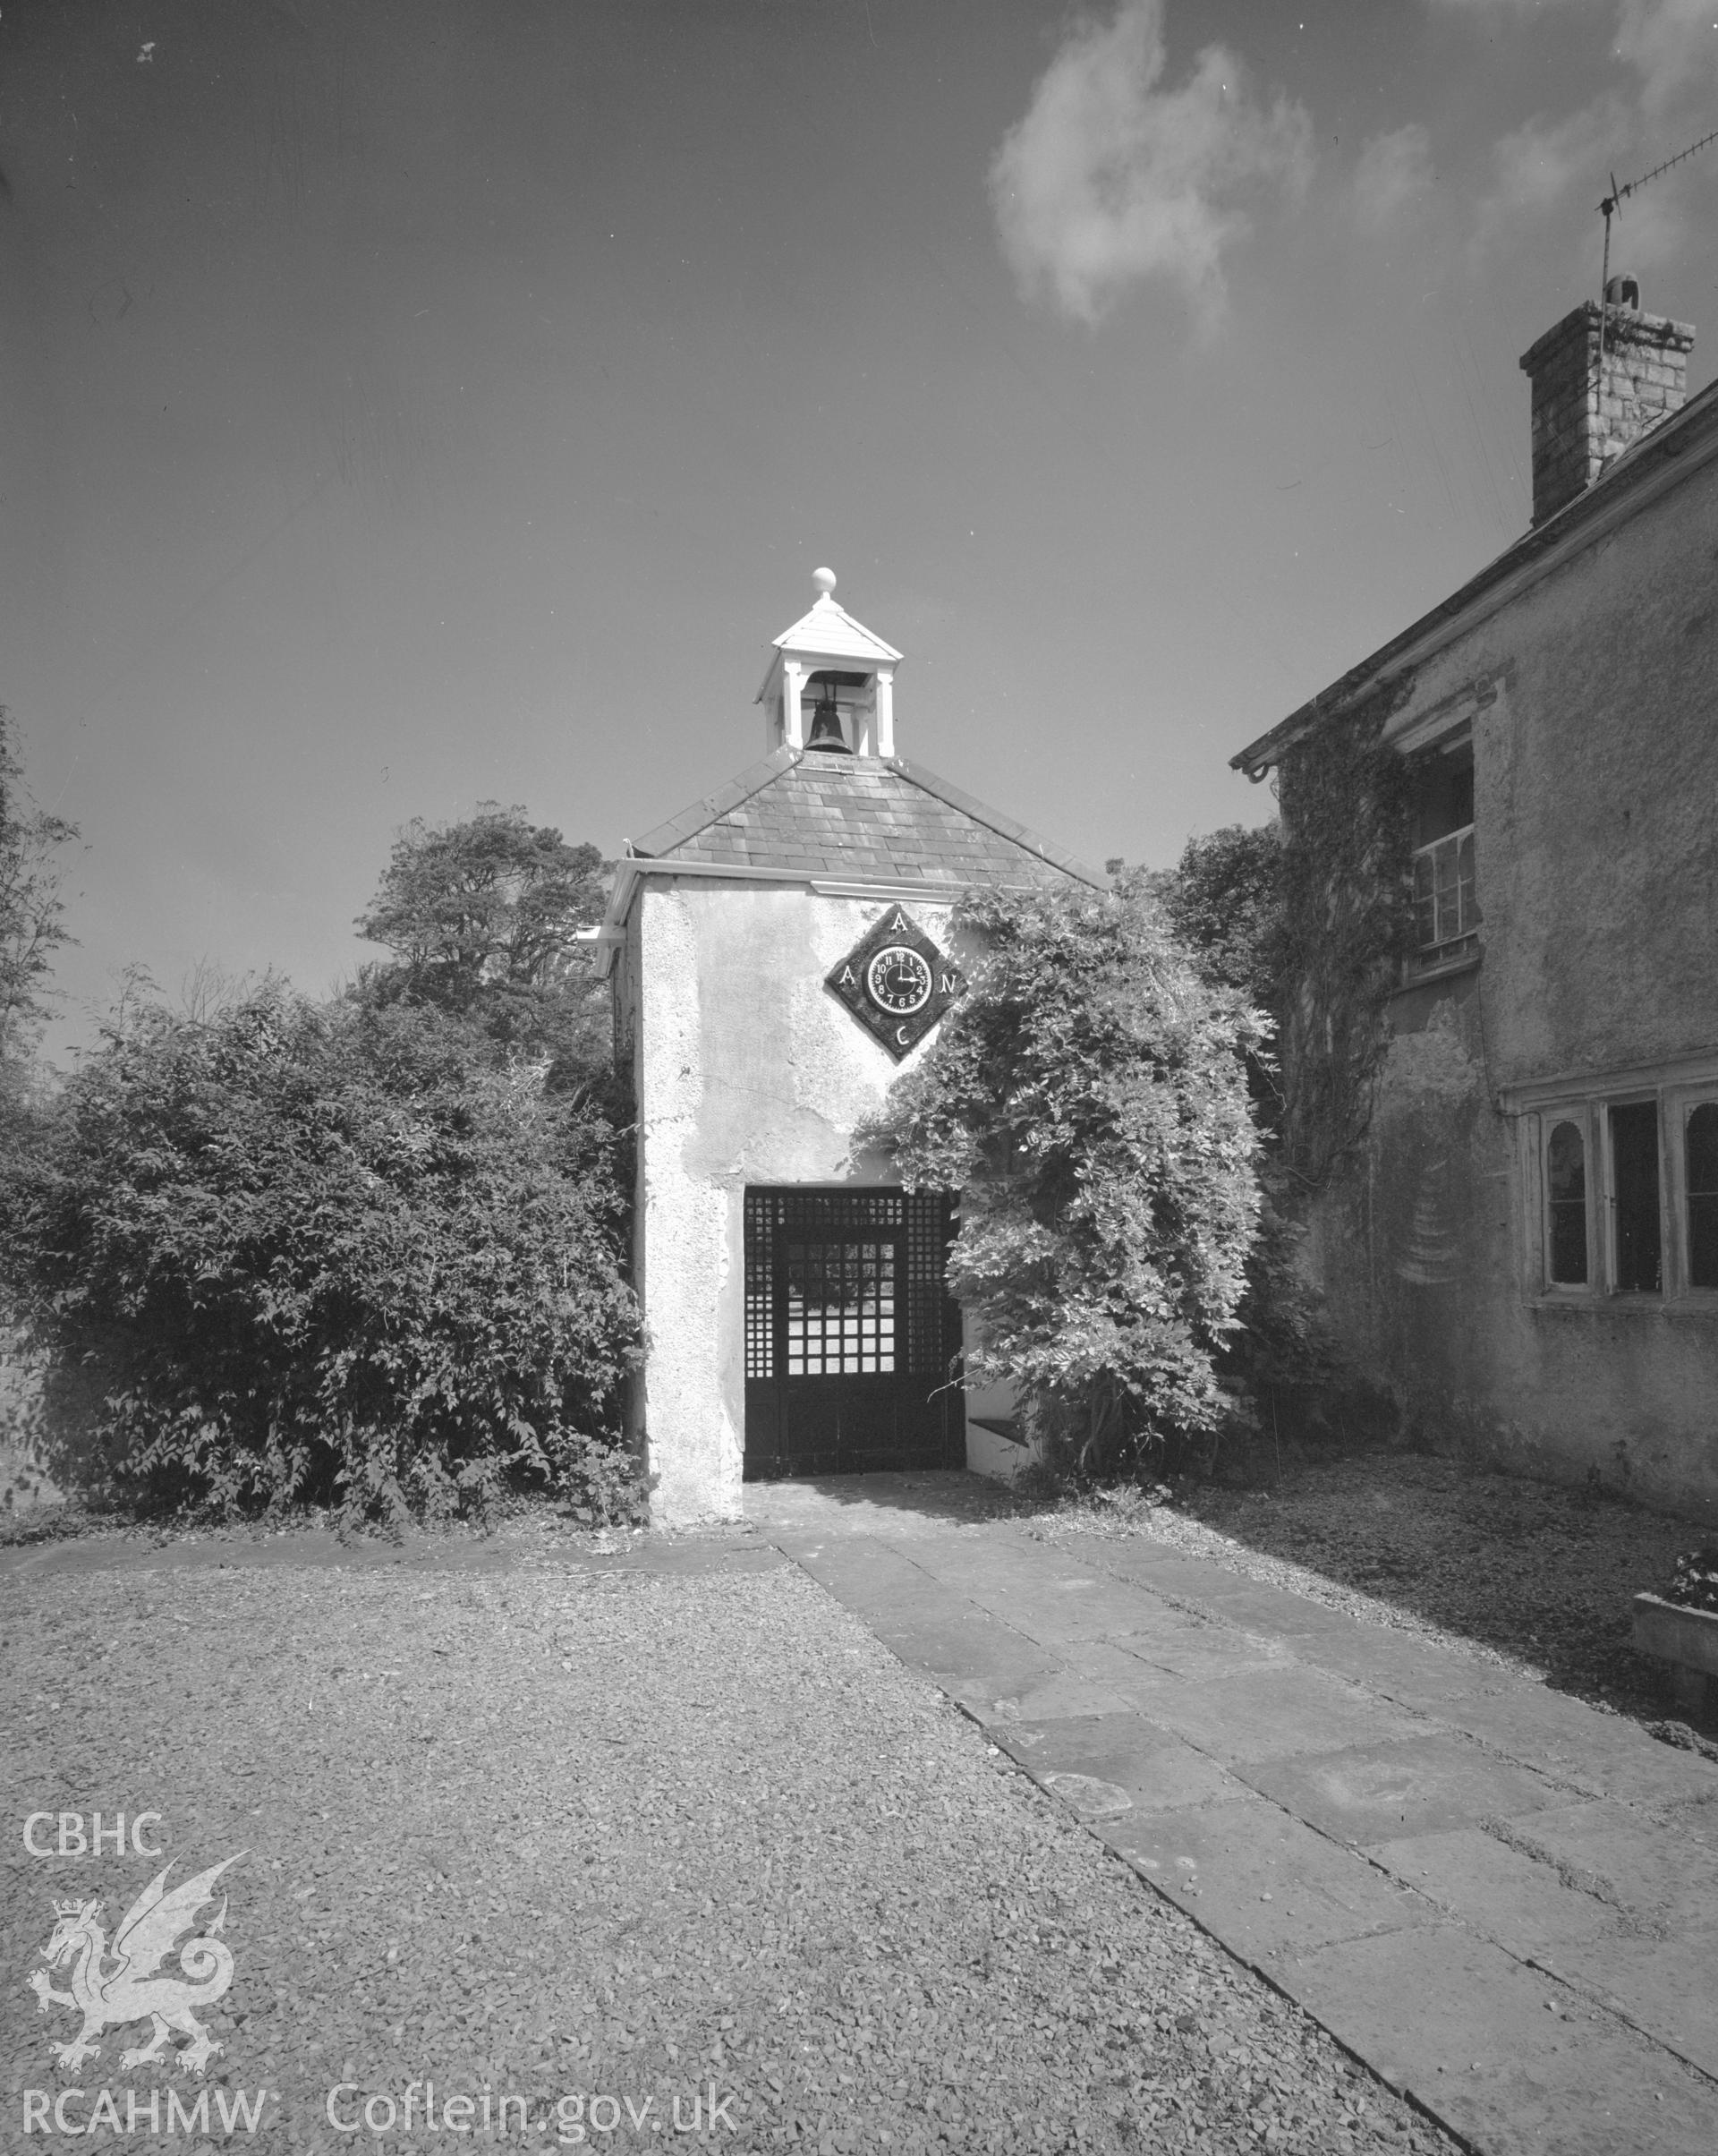 Black and white acetate negative showing exterior view of Boverton.